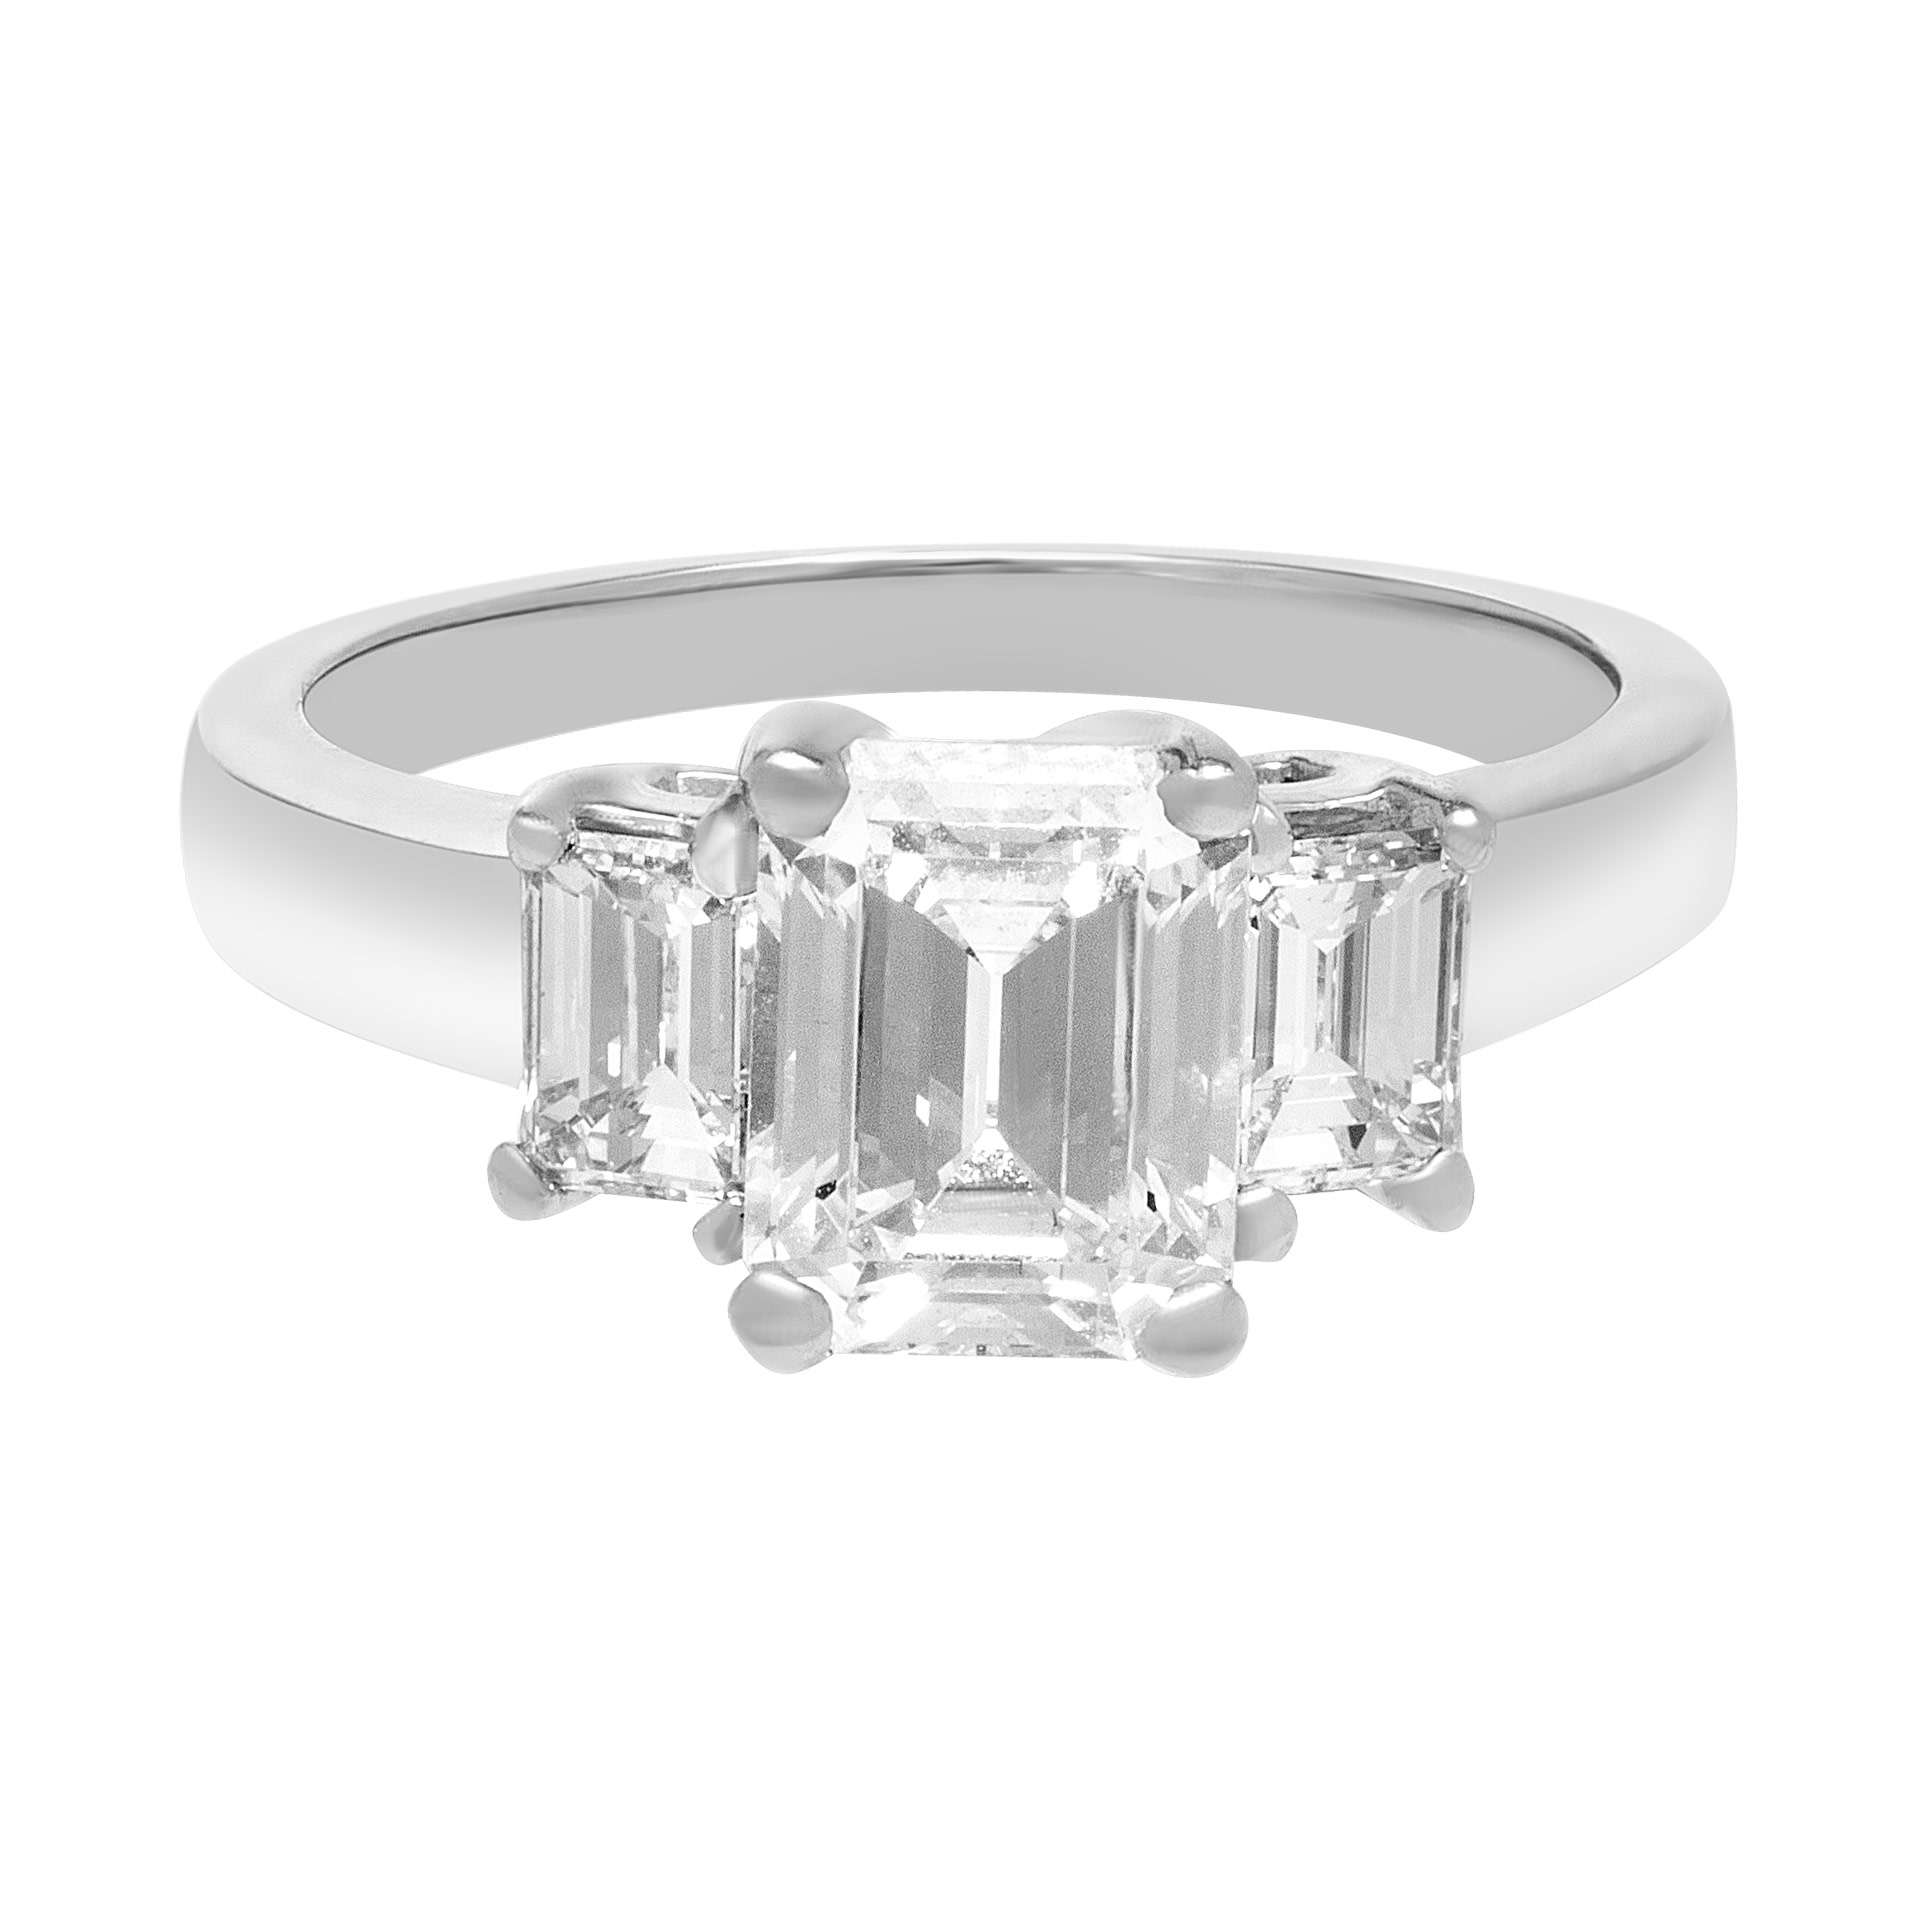 GIA certified 2.03 cts emerald cut diamond ring  in platinum (E color, VS2 clarity)